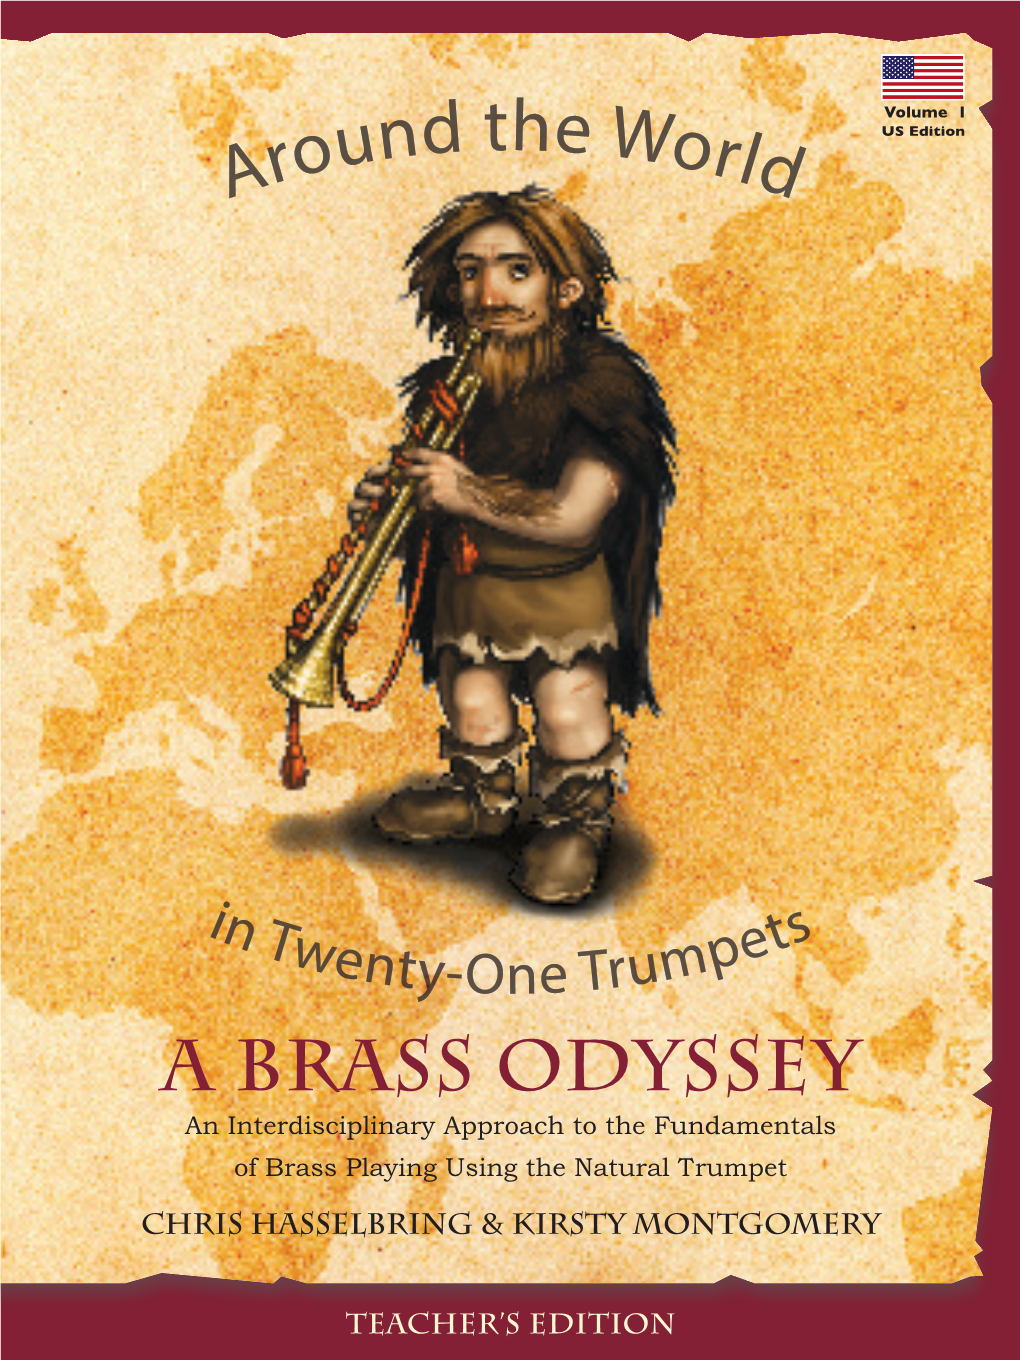 Around the World in Twenty-One Trumpets, and Learn About Its MEET RAGNAR, a Prehistoric Man Who Discovered How to Features and Online Resources